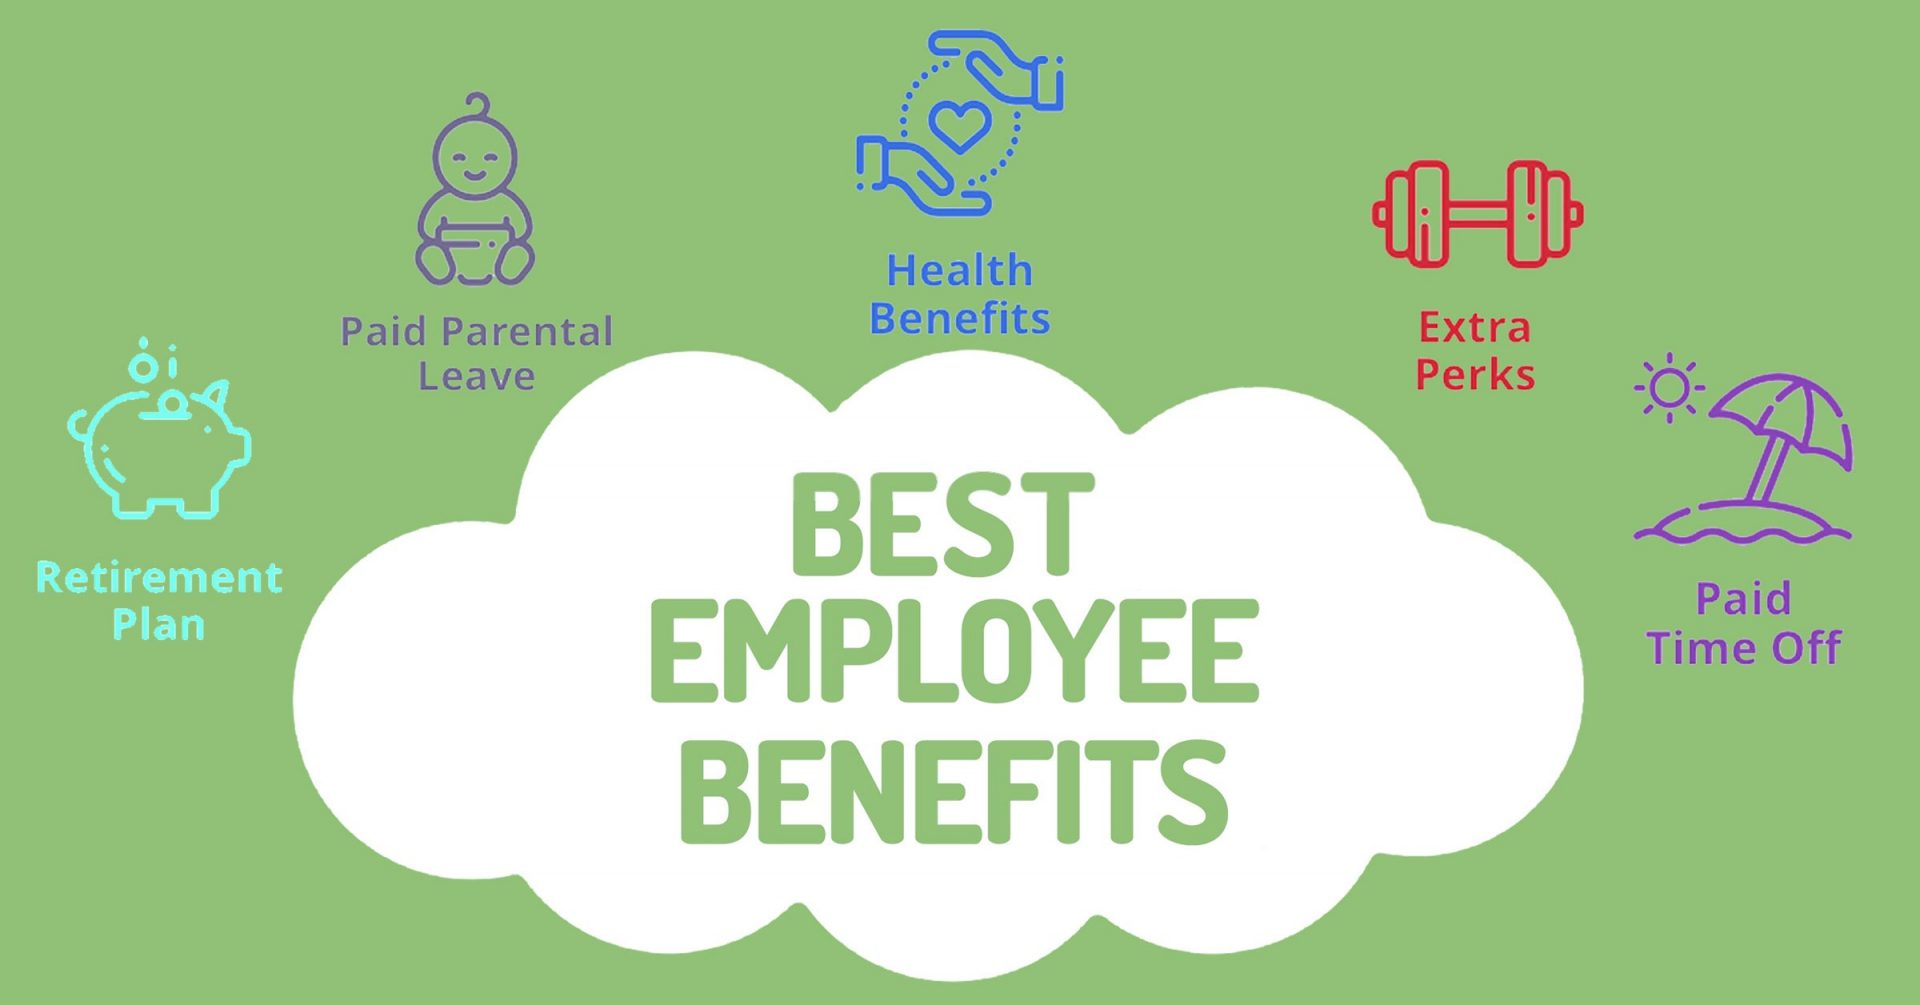 What Are The Most Desirable Employee Benefits?